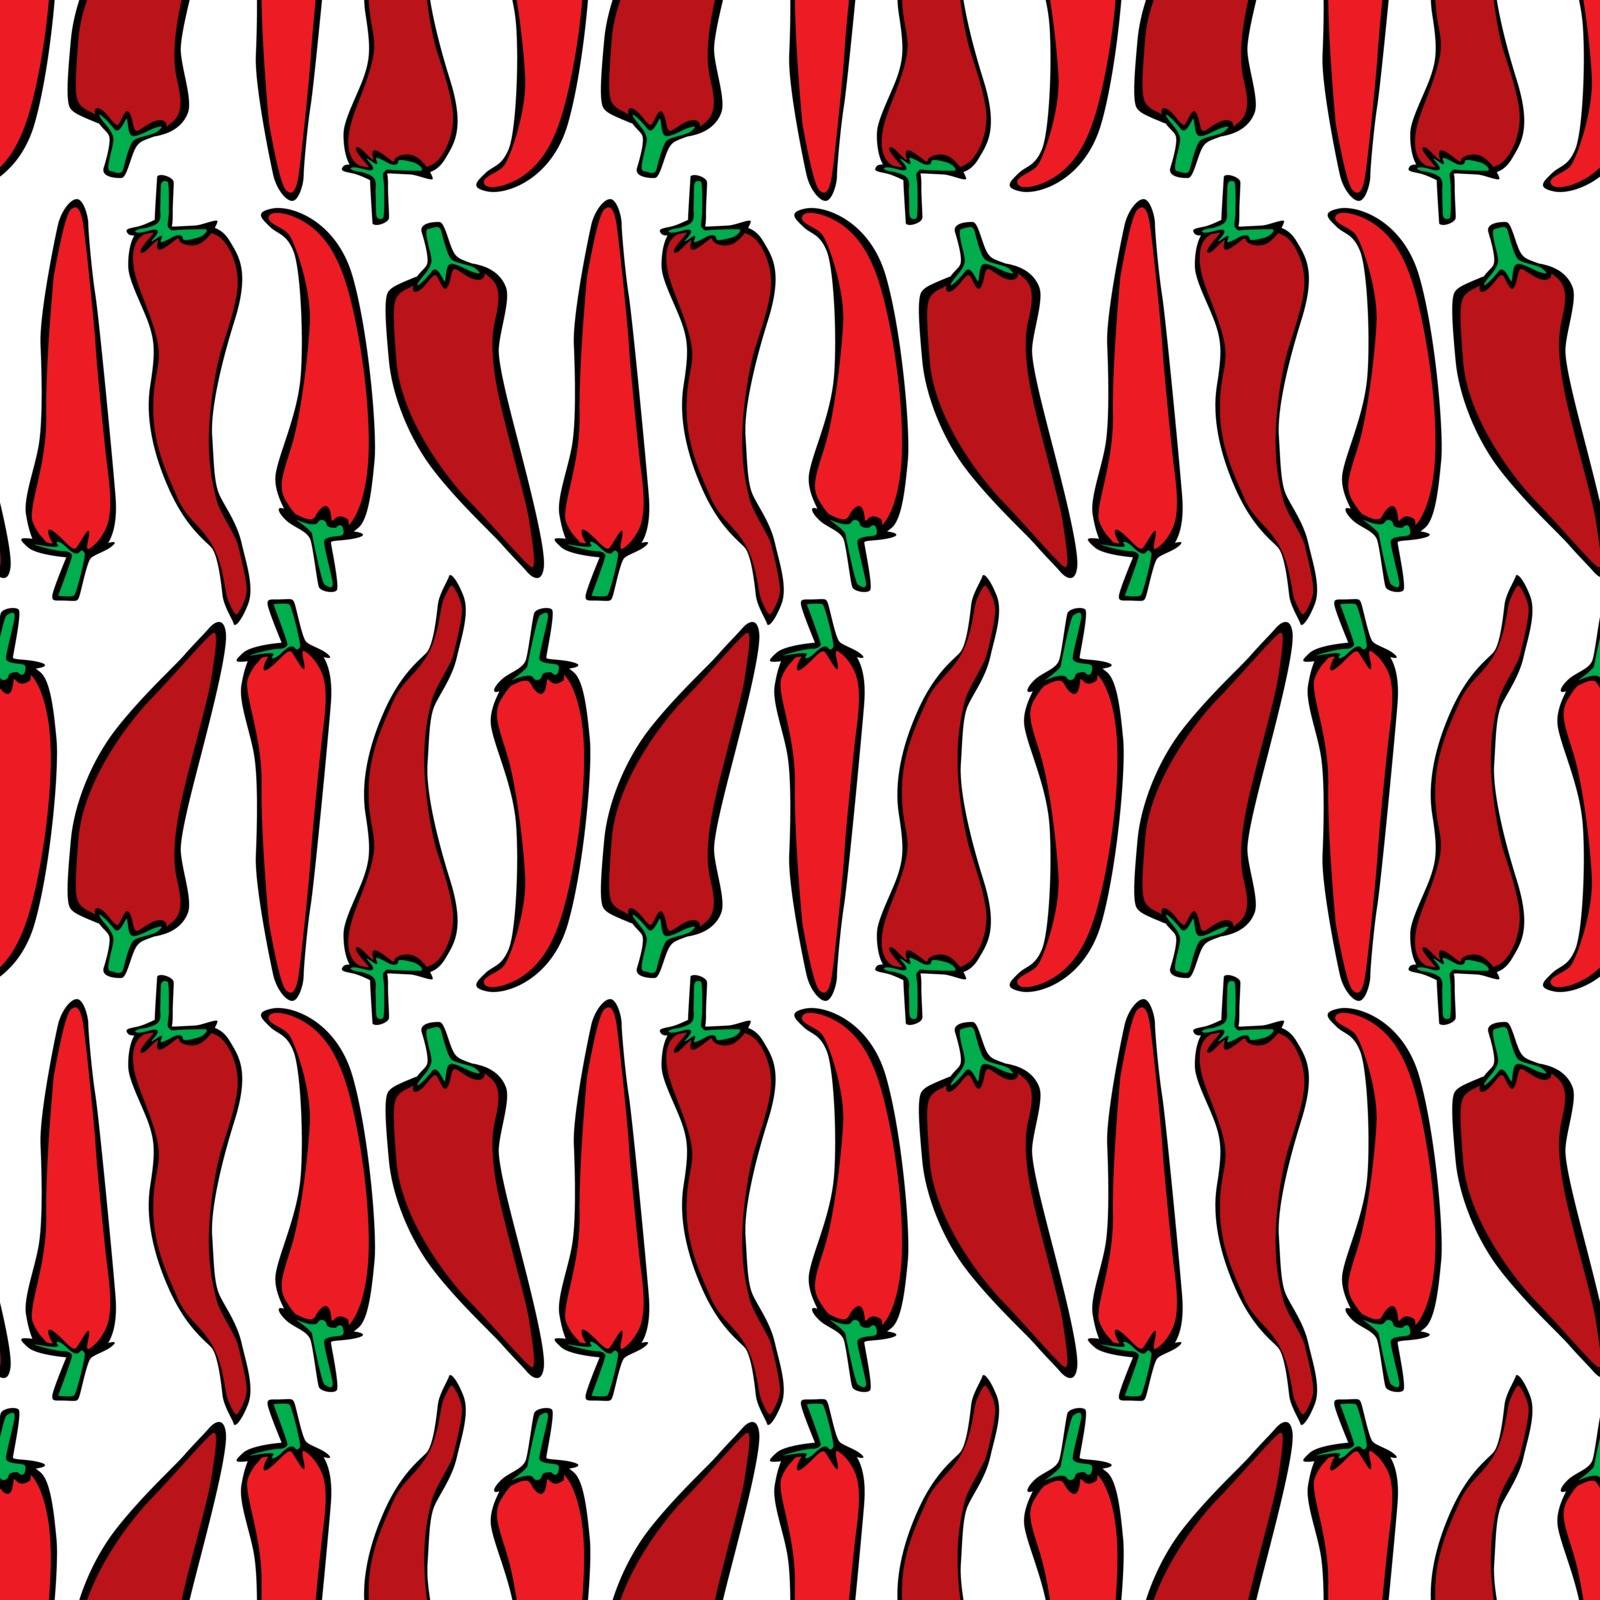 Seamless pattern made of illustrated chilli peppers on white